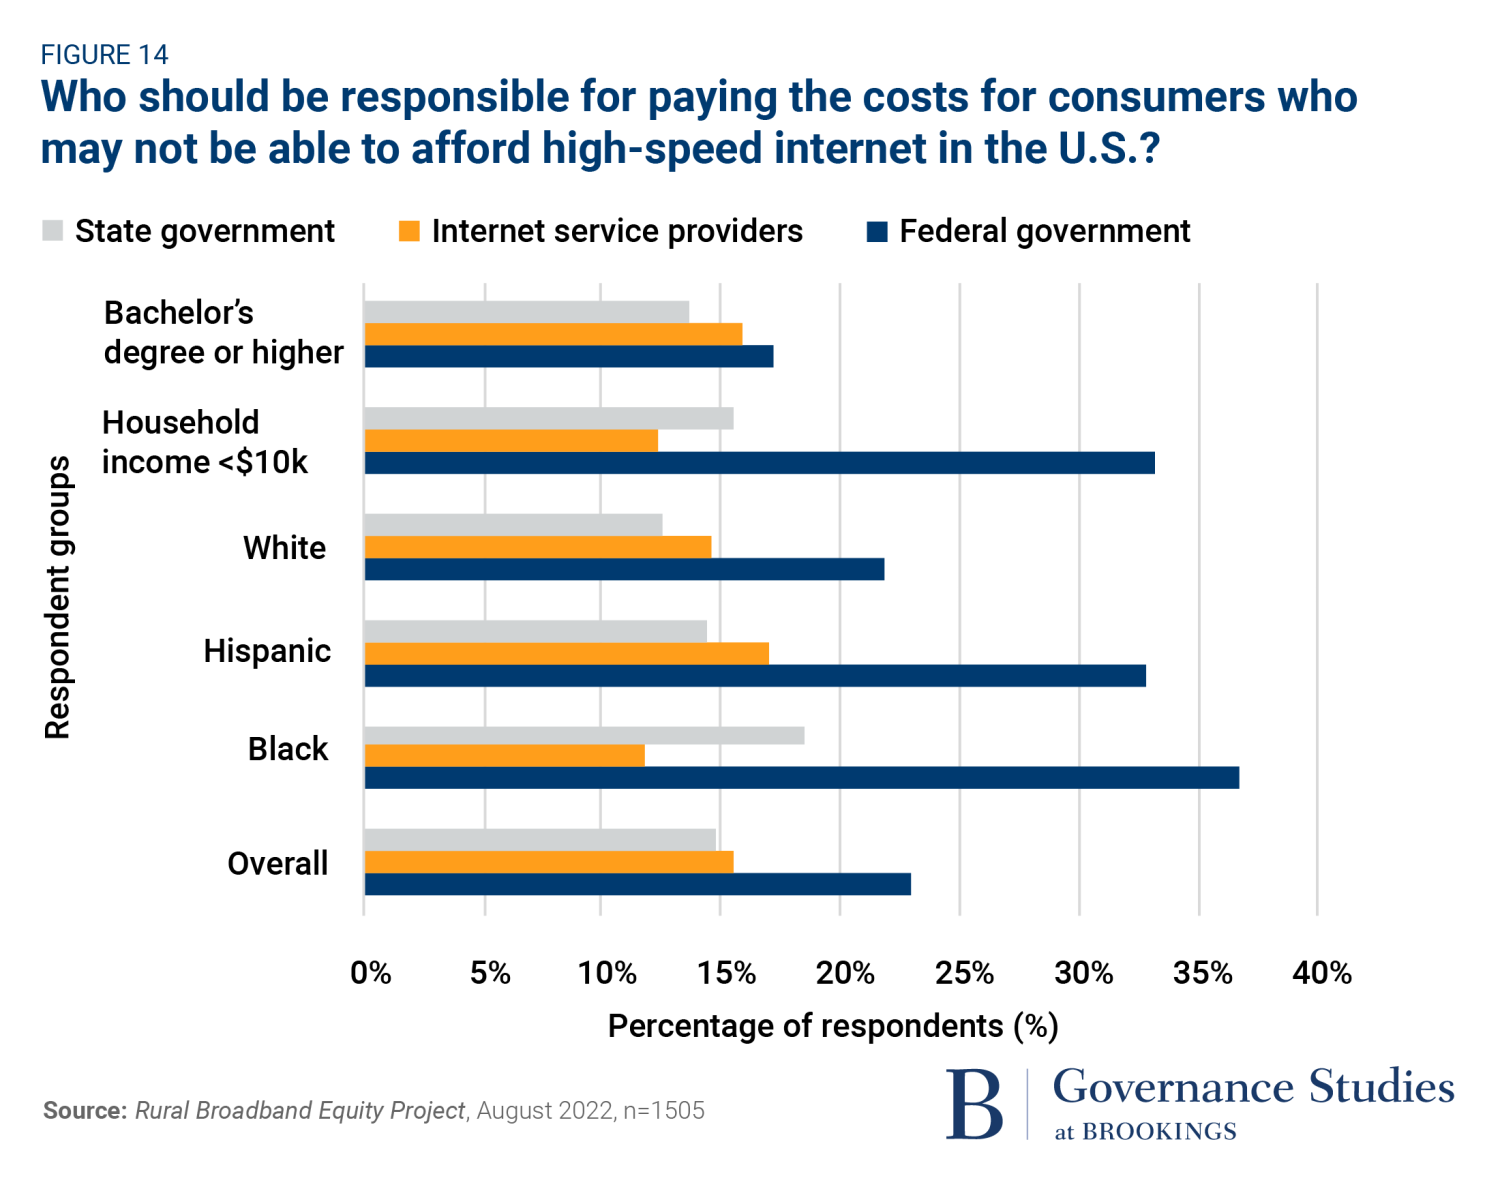 Who Should Be Responsible for Paying the Costs for Consumers Who May Not Be Able to Afford High-speed Internet in the U.S.